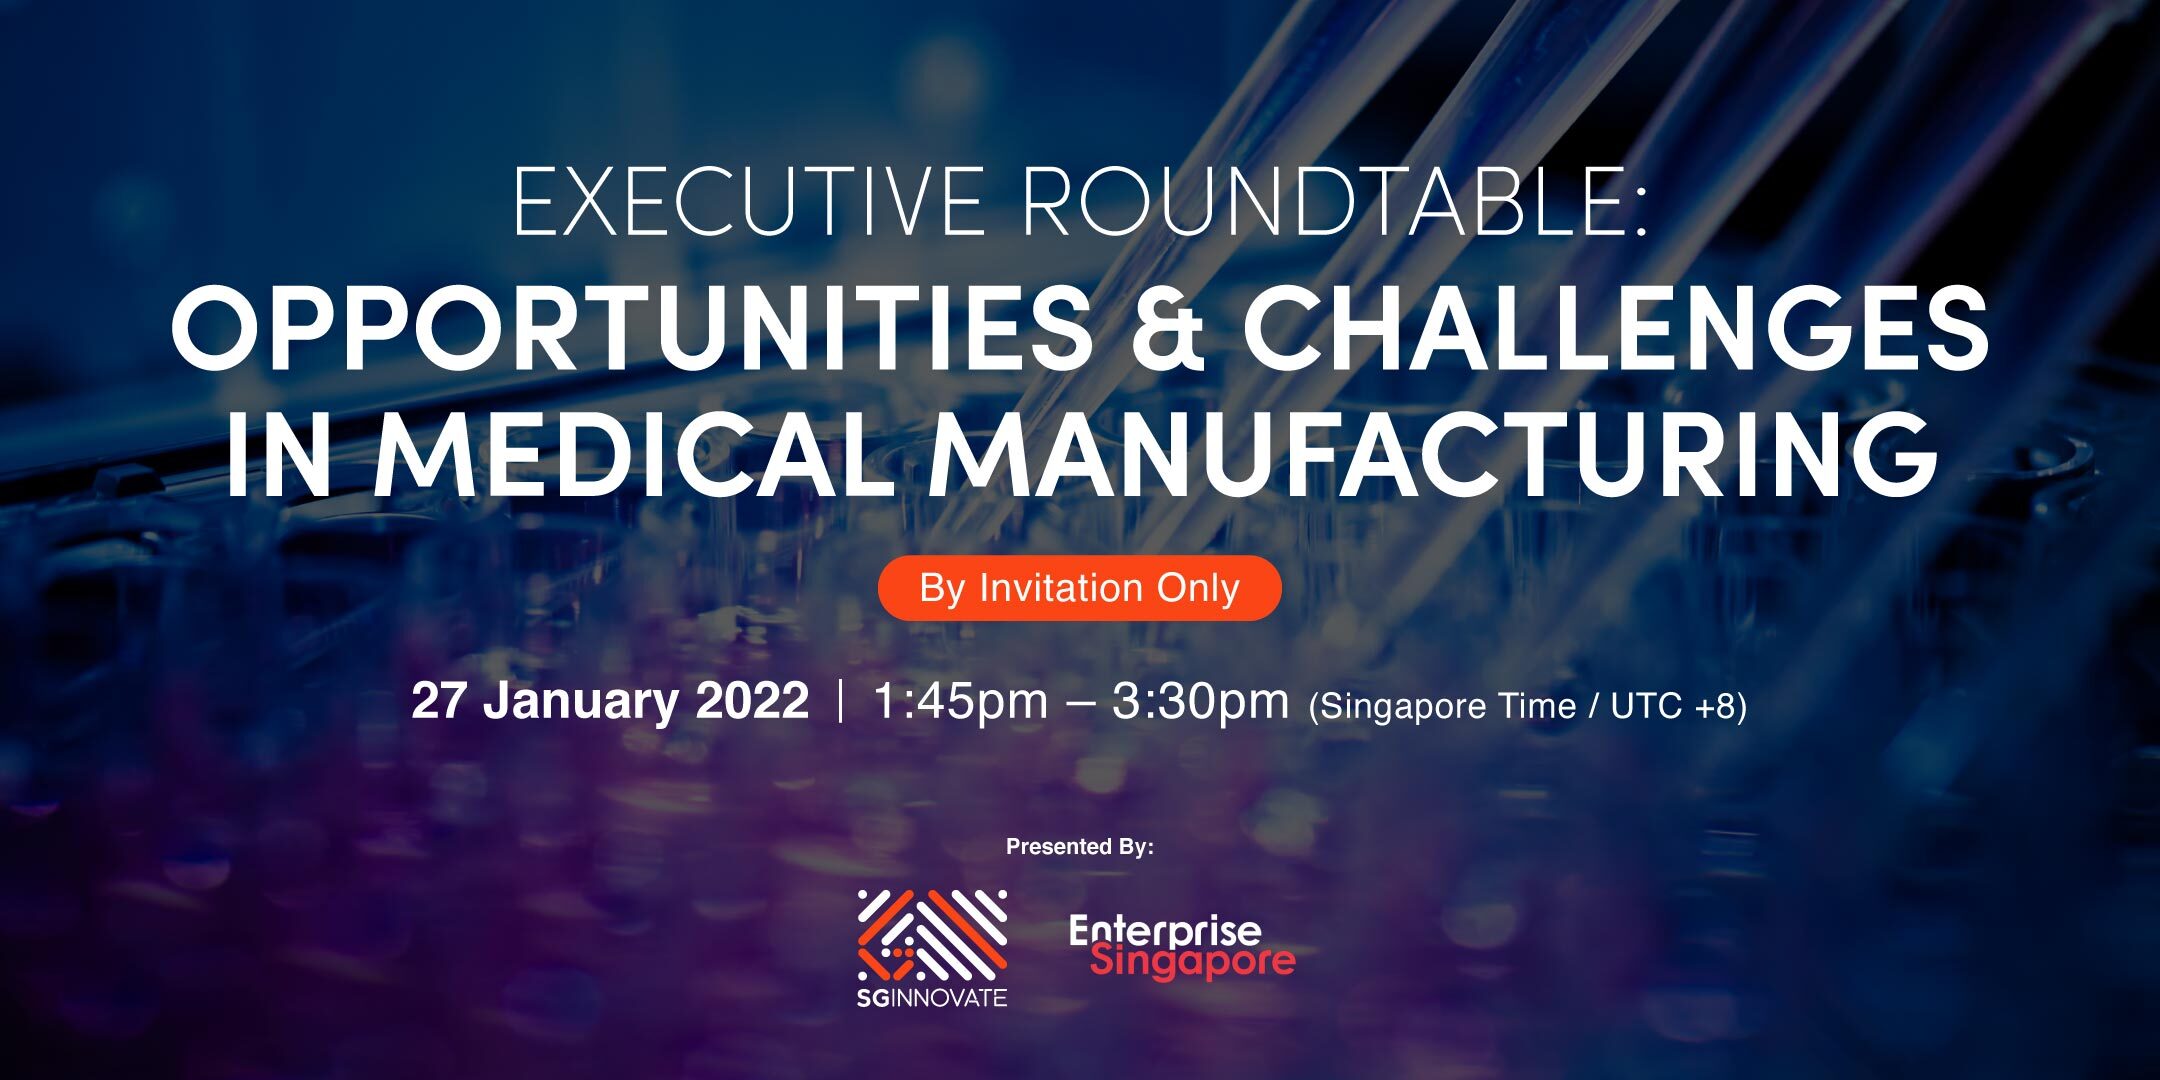 Executive Roundtable: Opportunities & Challenges in Medical Manufacturing